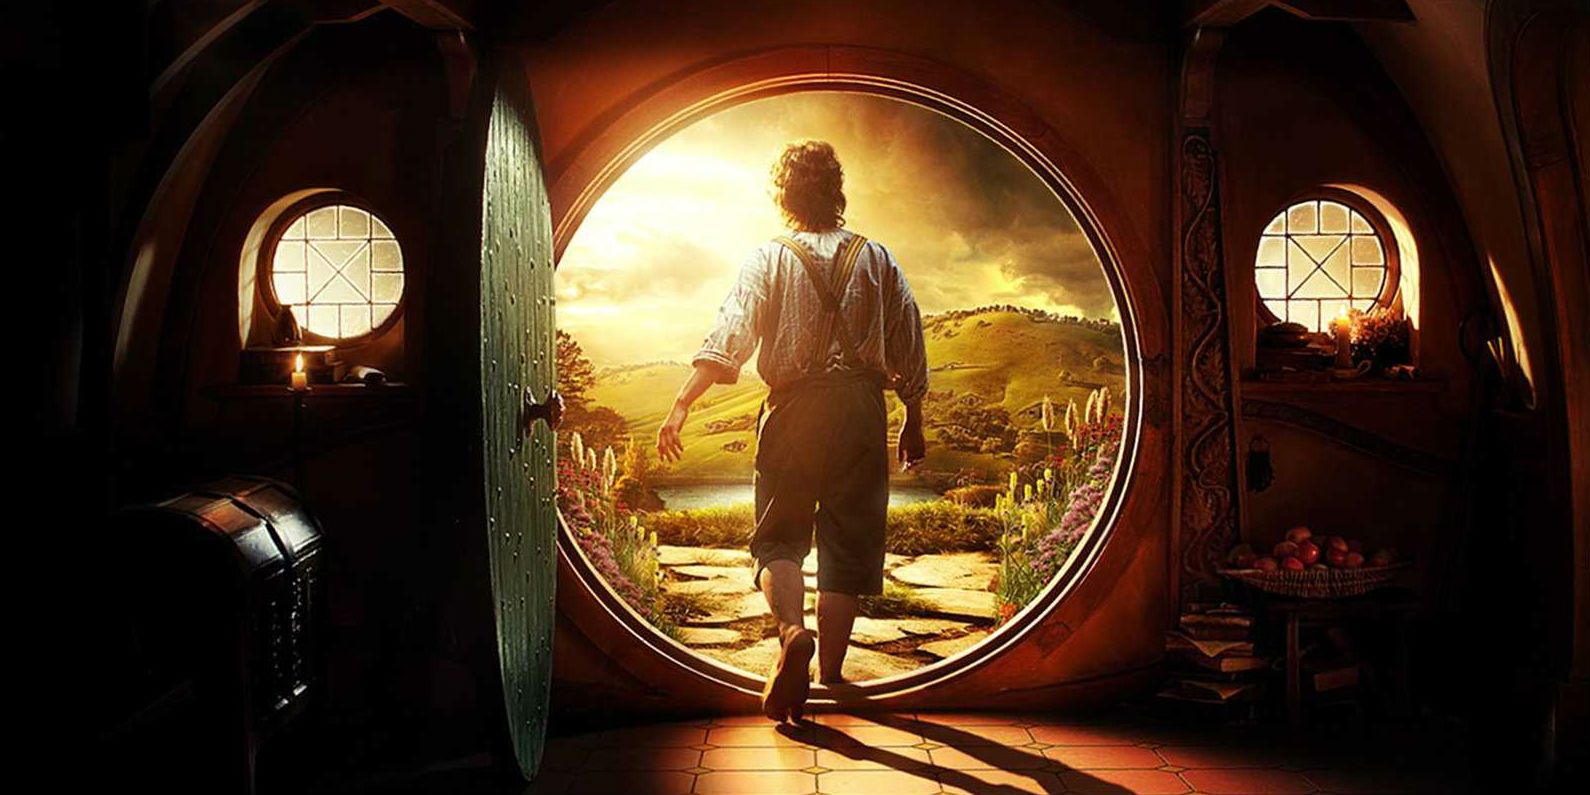 10 Most Inspiring Quotes From The Hobbit Films